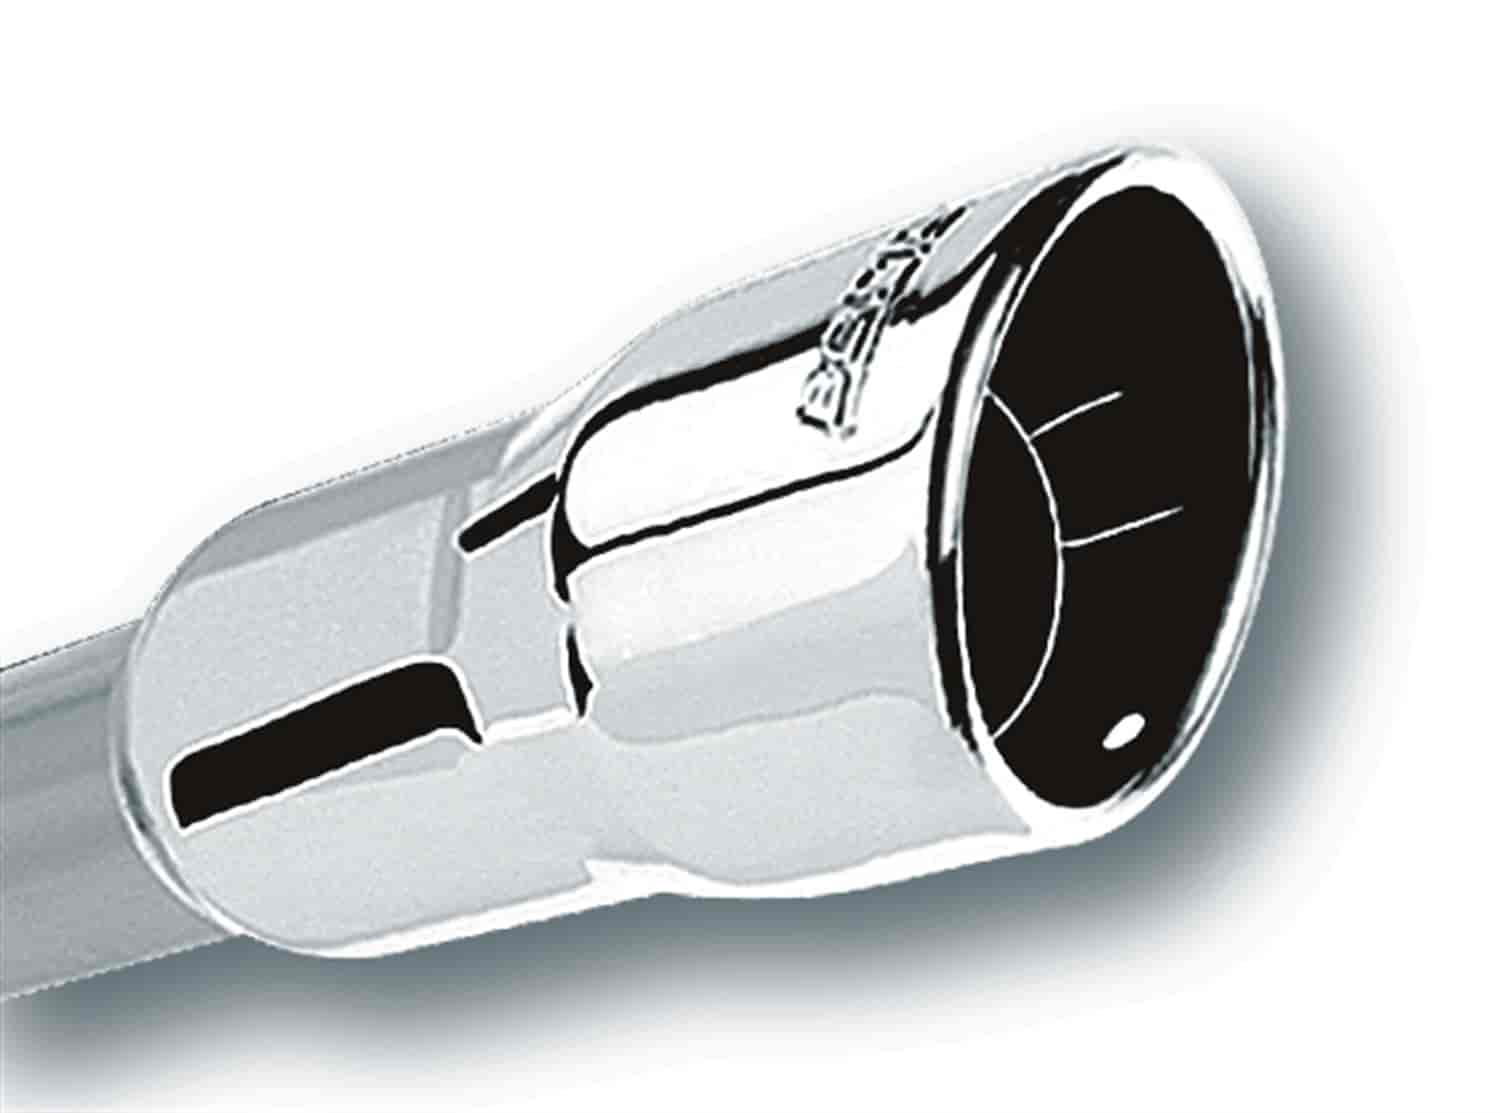 Stainless Steel Exhaust Tip Outlet Size: 3-1/2"